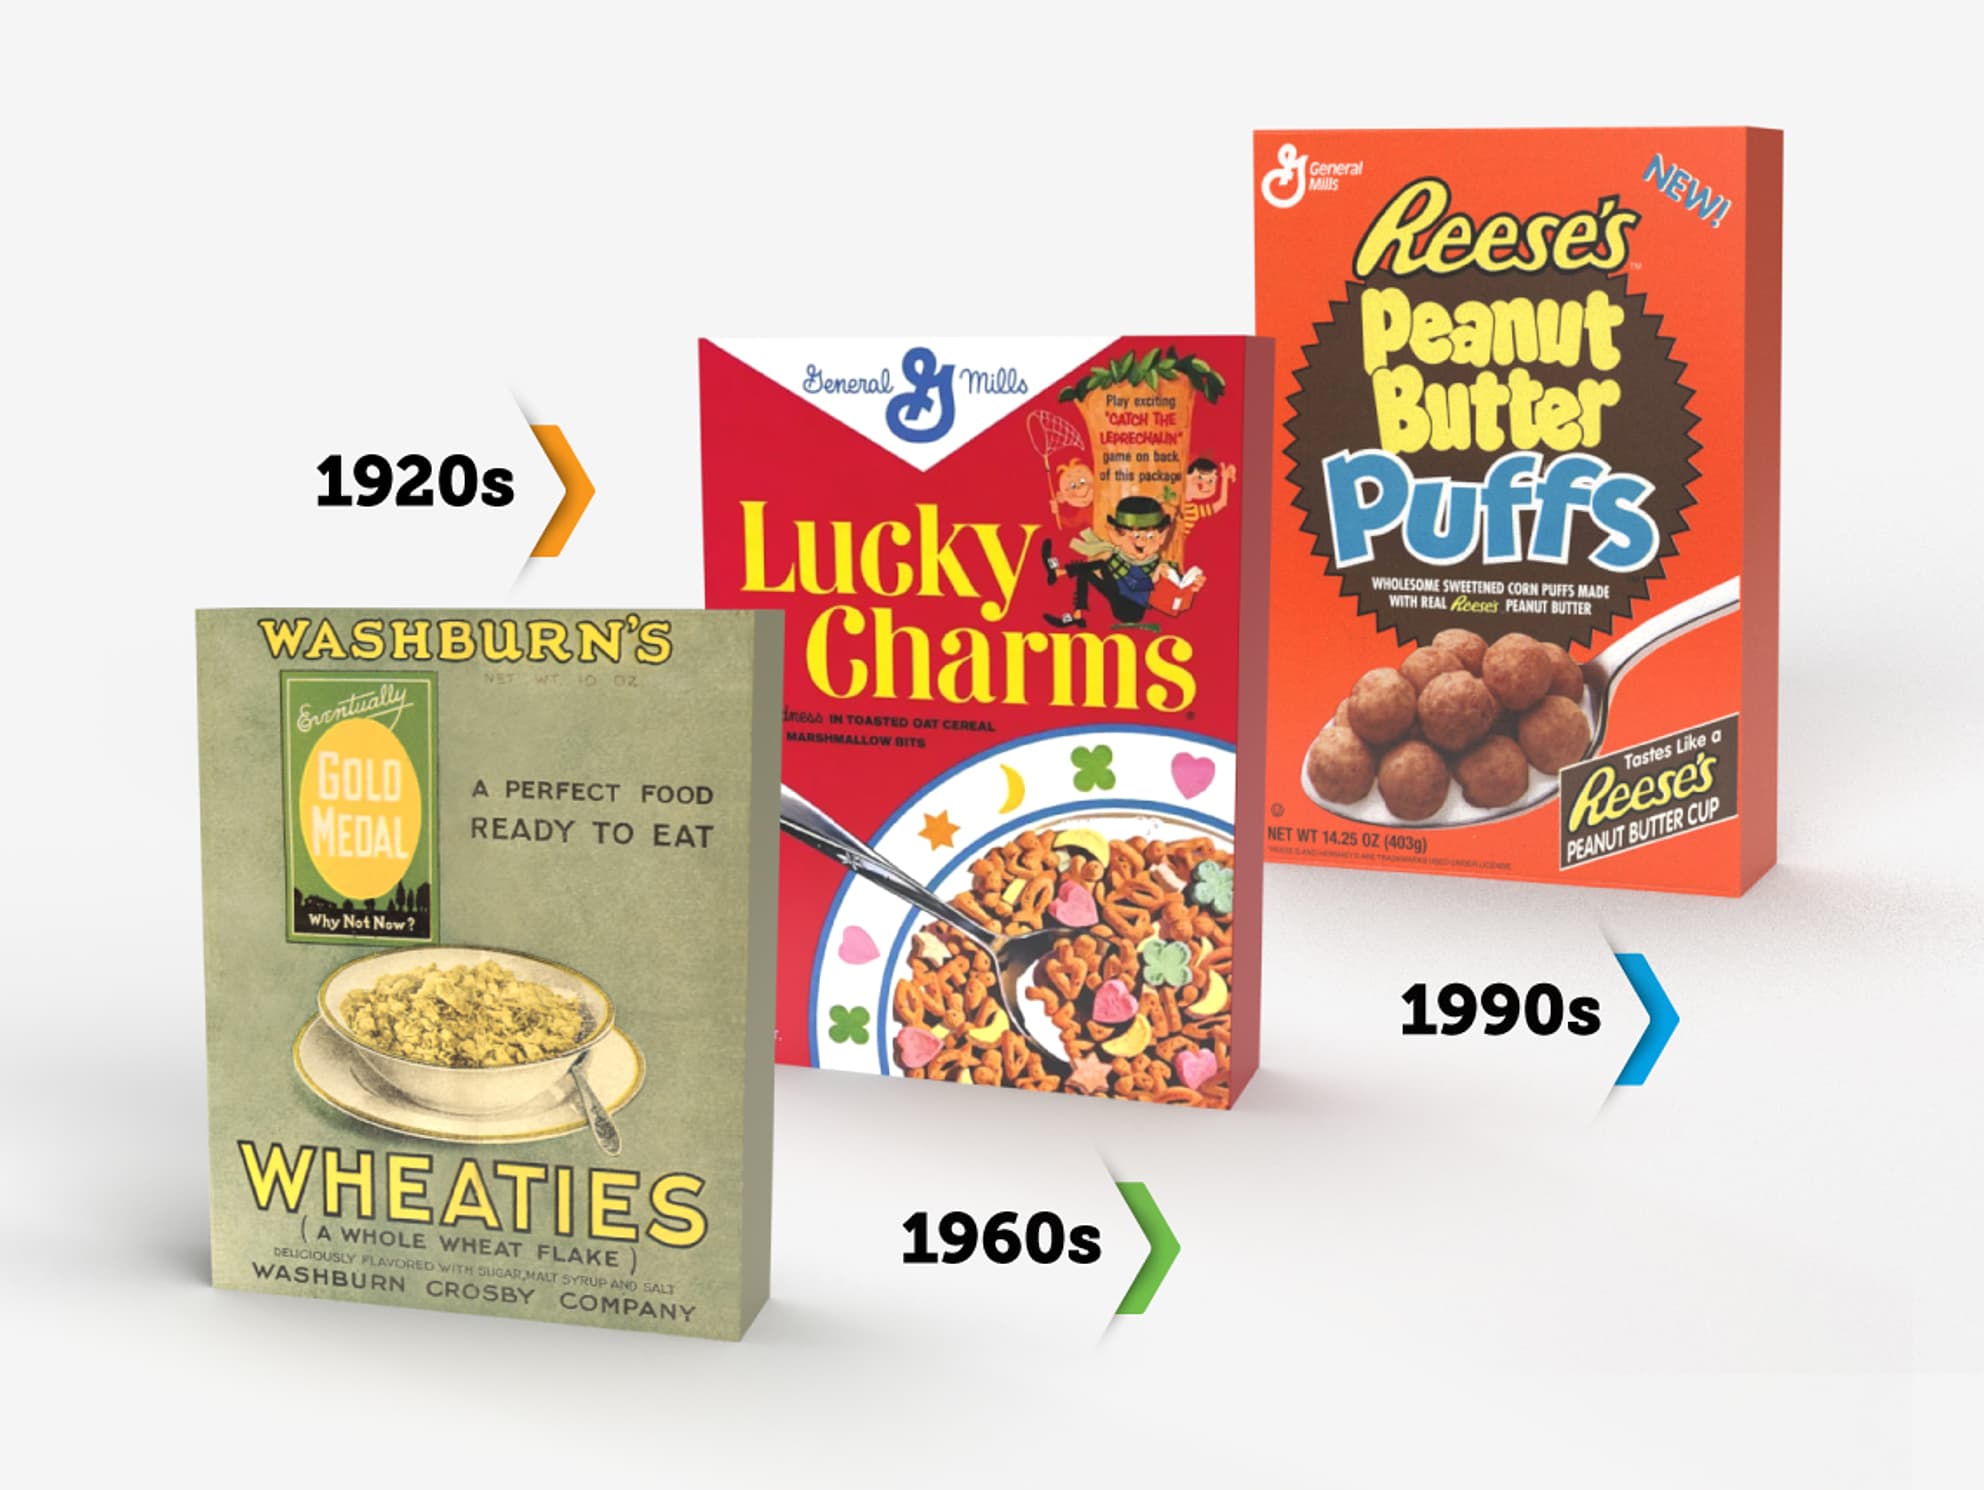 General Mills Wheaties, Lucky Charms and REESE'S PUFFS cereals